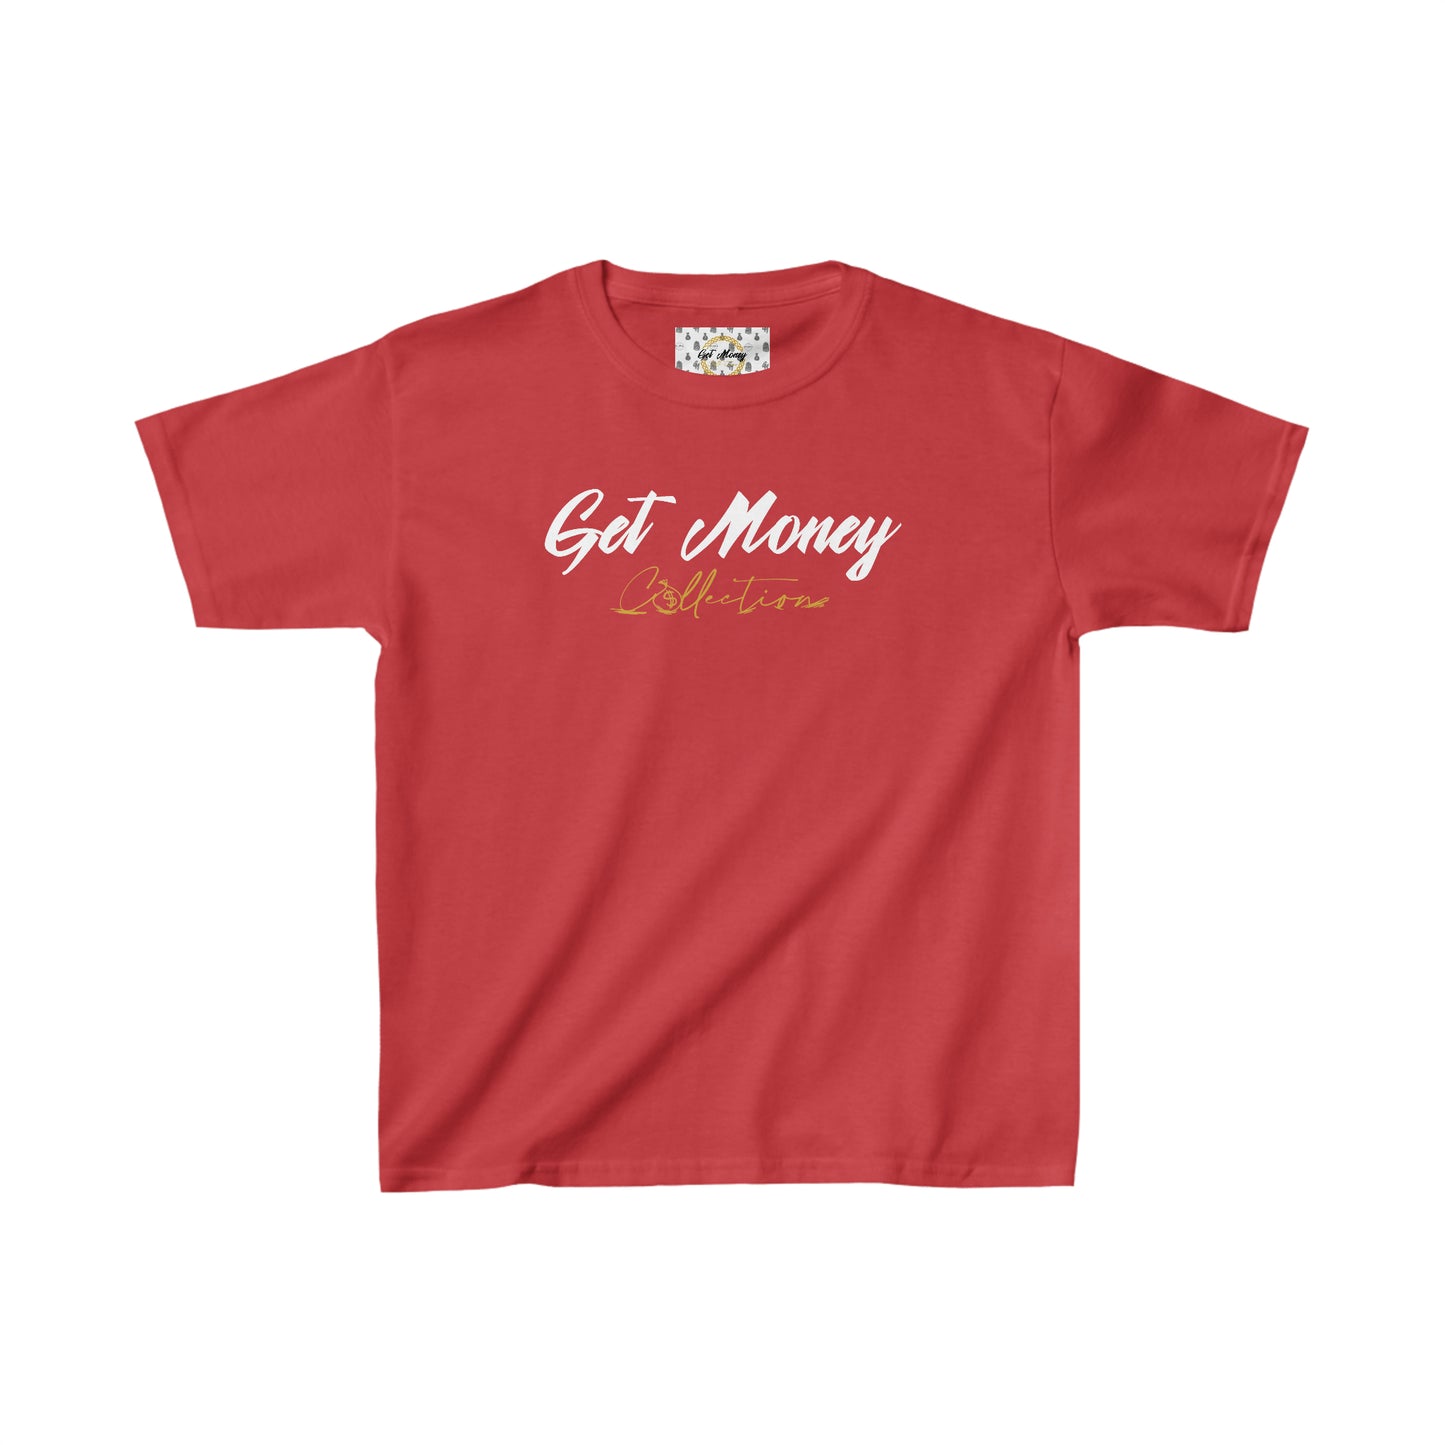 Get Money Collection Foundation T-shirt for Kids